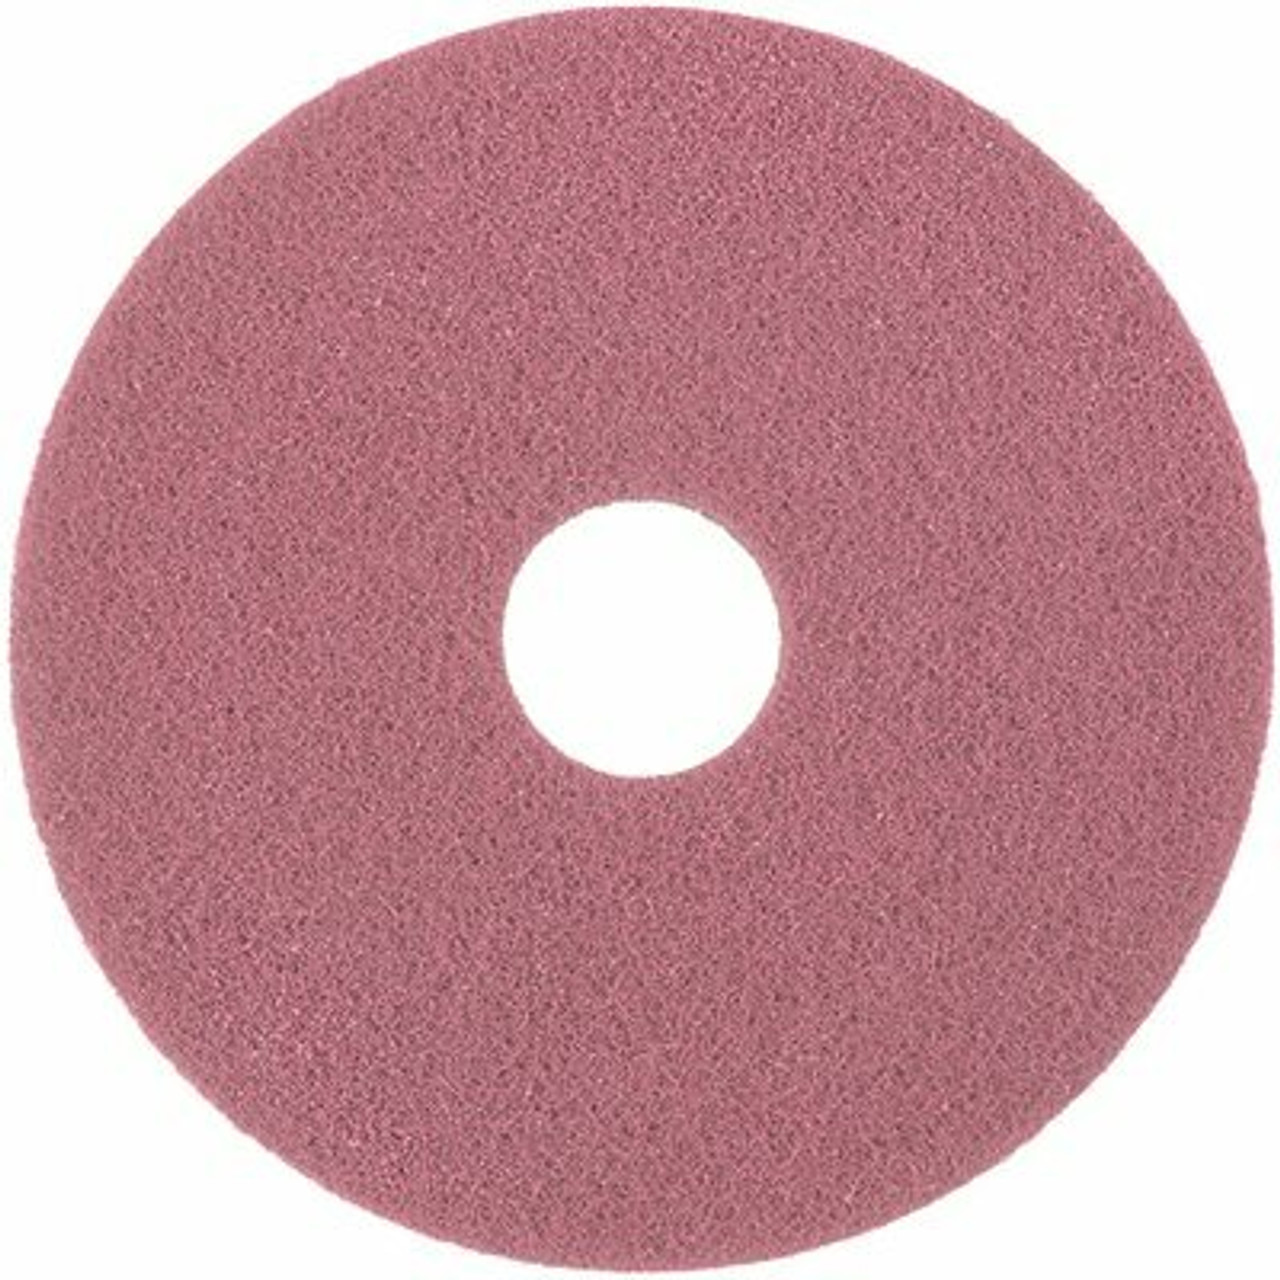 Diversey Twister Ht Pad 27 In. Pink, 2 Ea, Na, 1/Ct